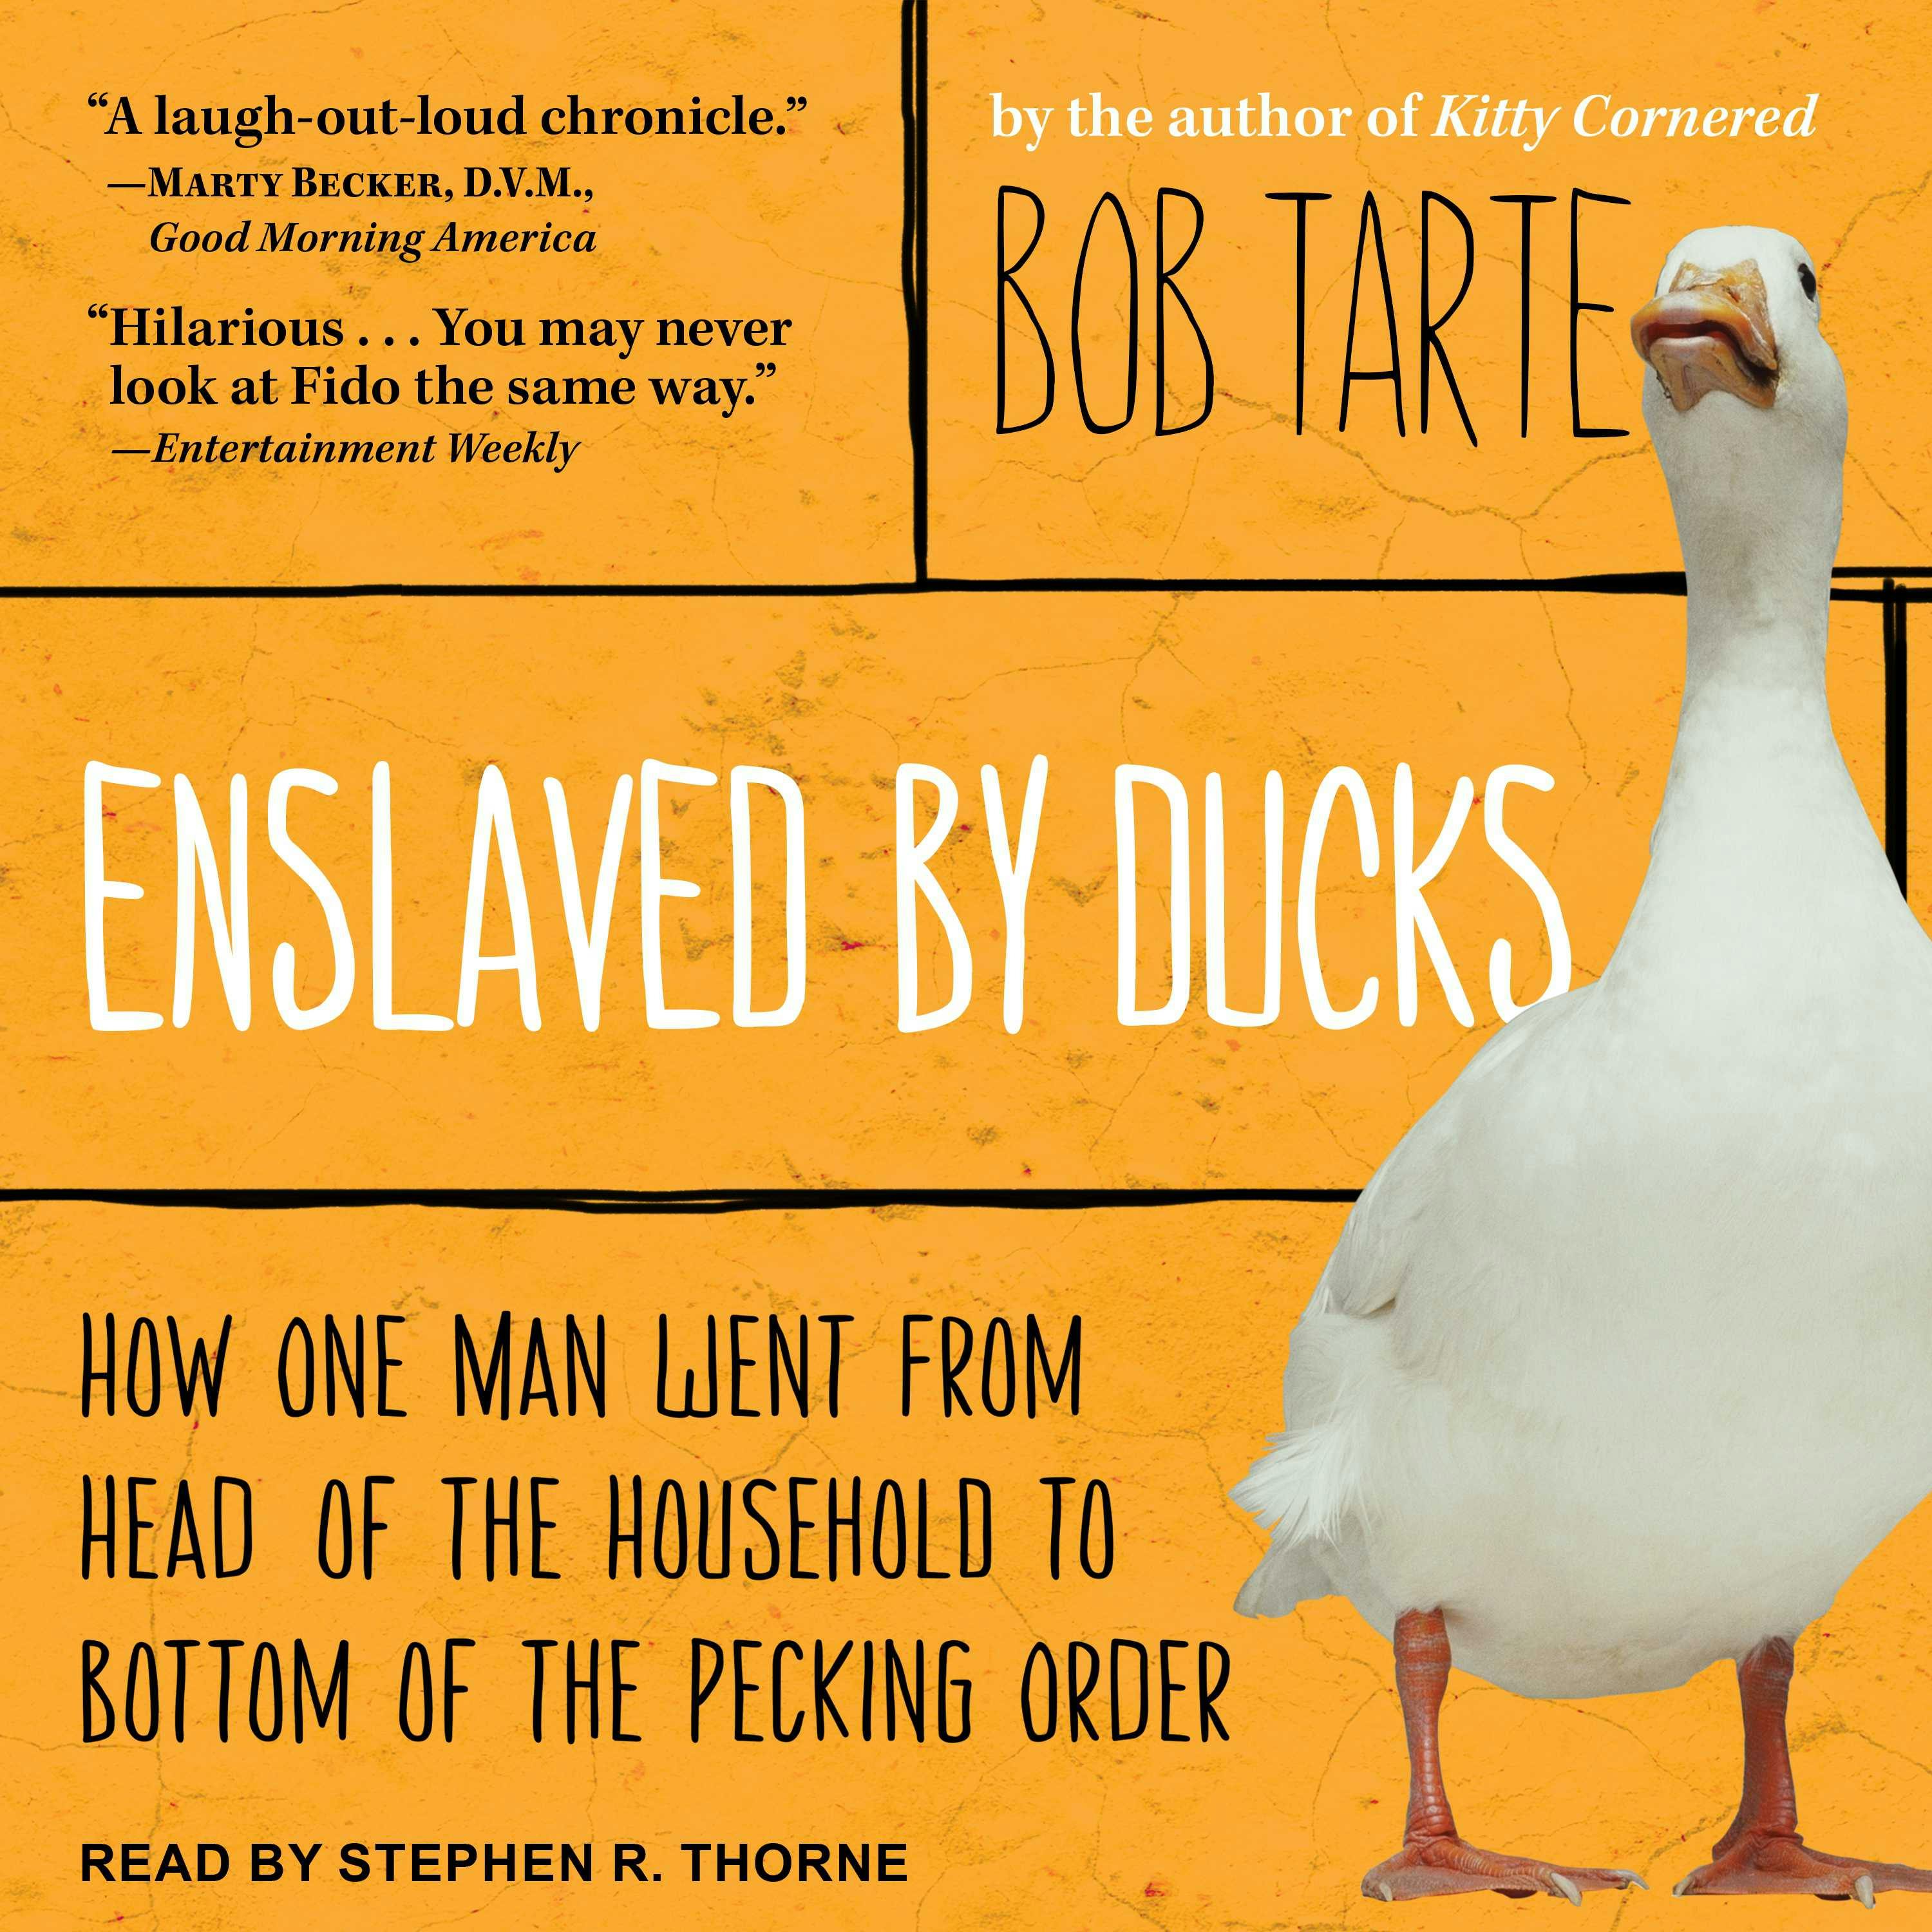 Enslaved by Ducks: How One Man Went from Head of the Household to Bottom of the Pecking Order - Bob Tarte